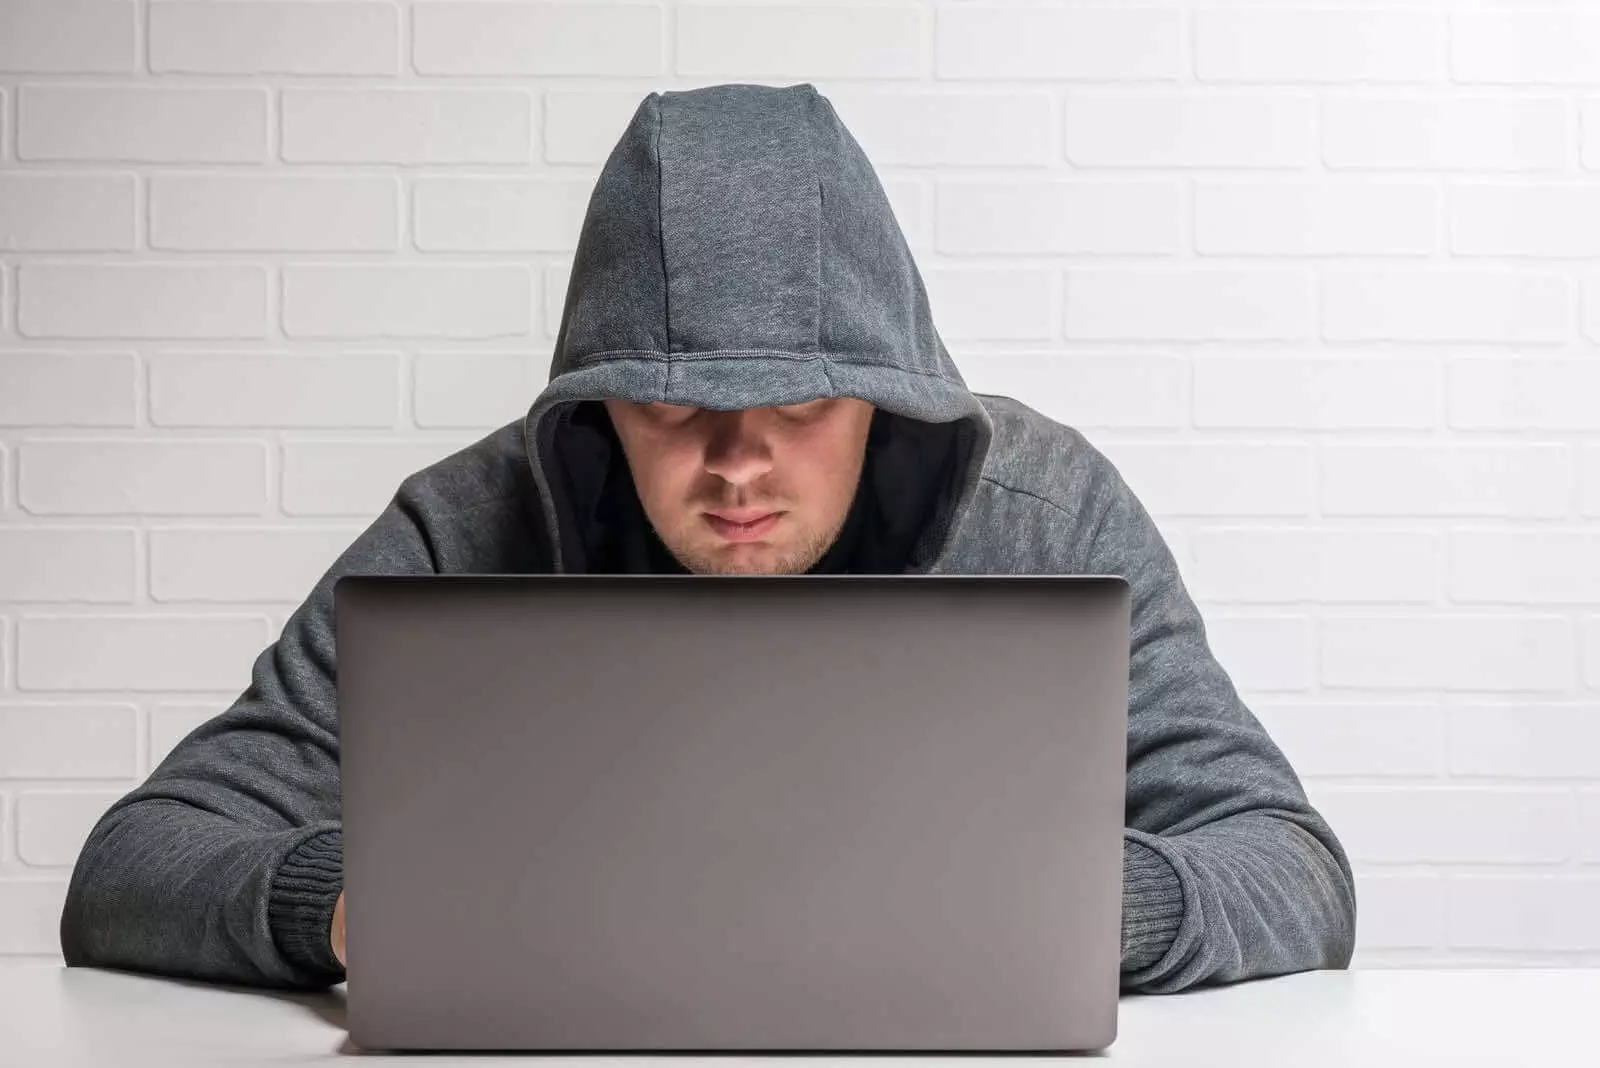 A Man In A Hoodie Is Using A Laptop To Blog Anonymously.